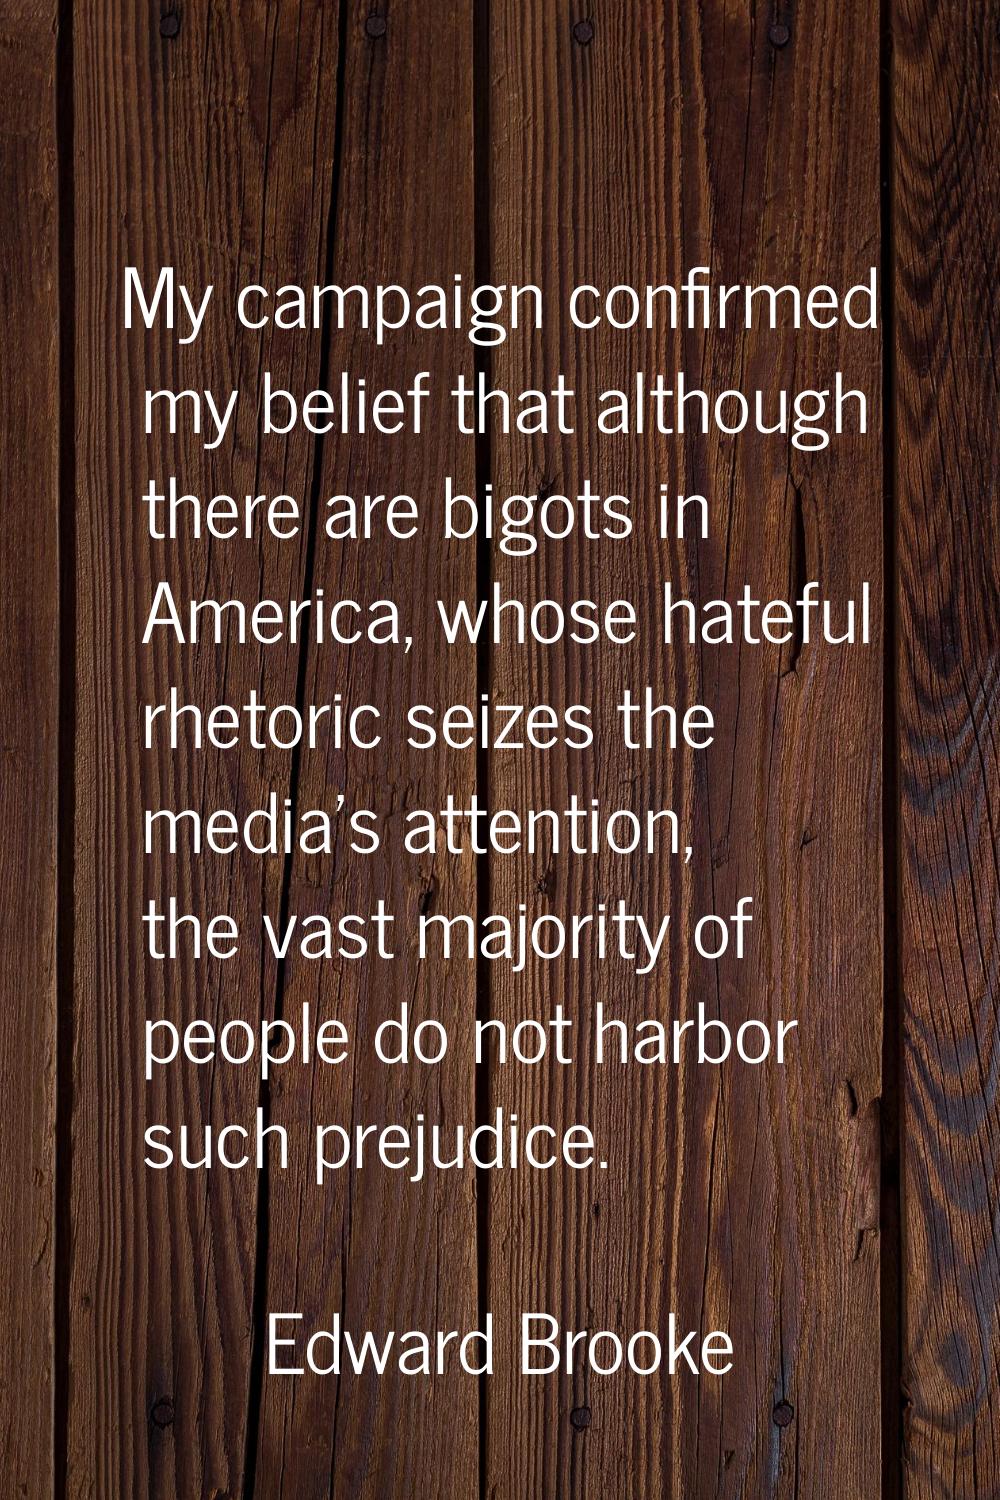 My campaign confirmed my belief that although there are bigots in America, whose hateful rhetoric s